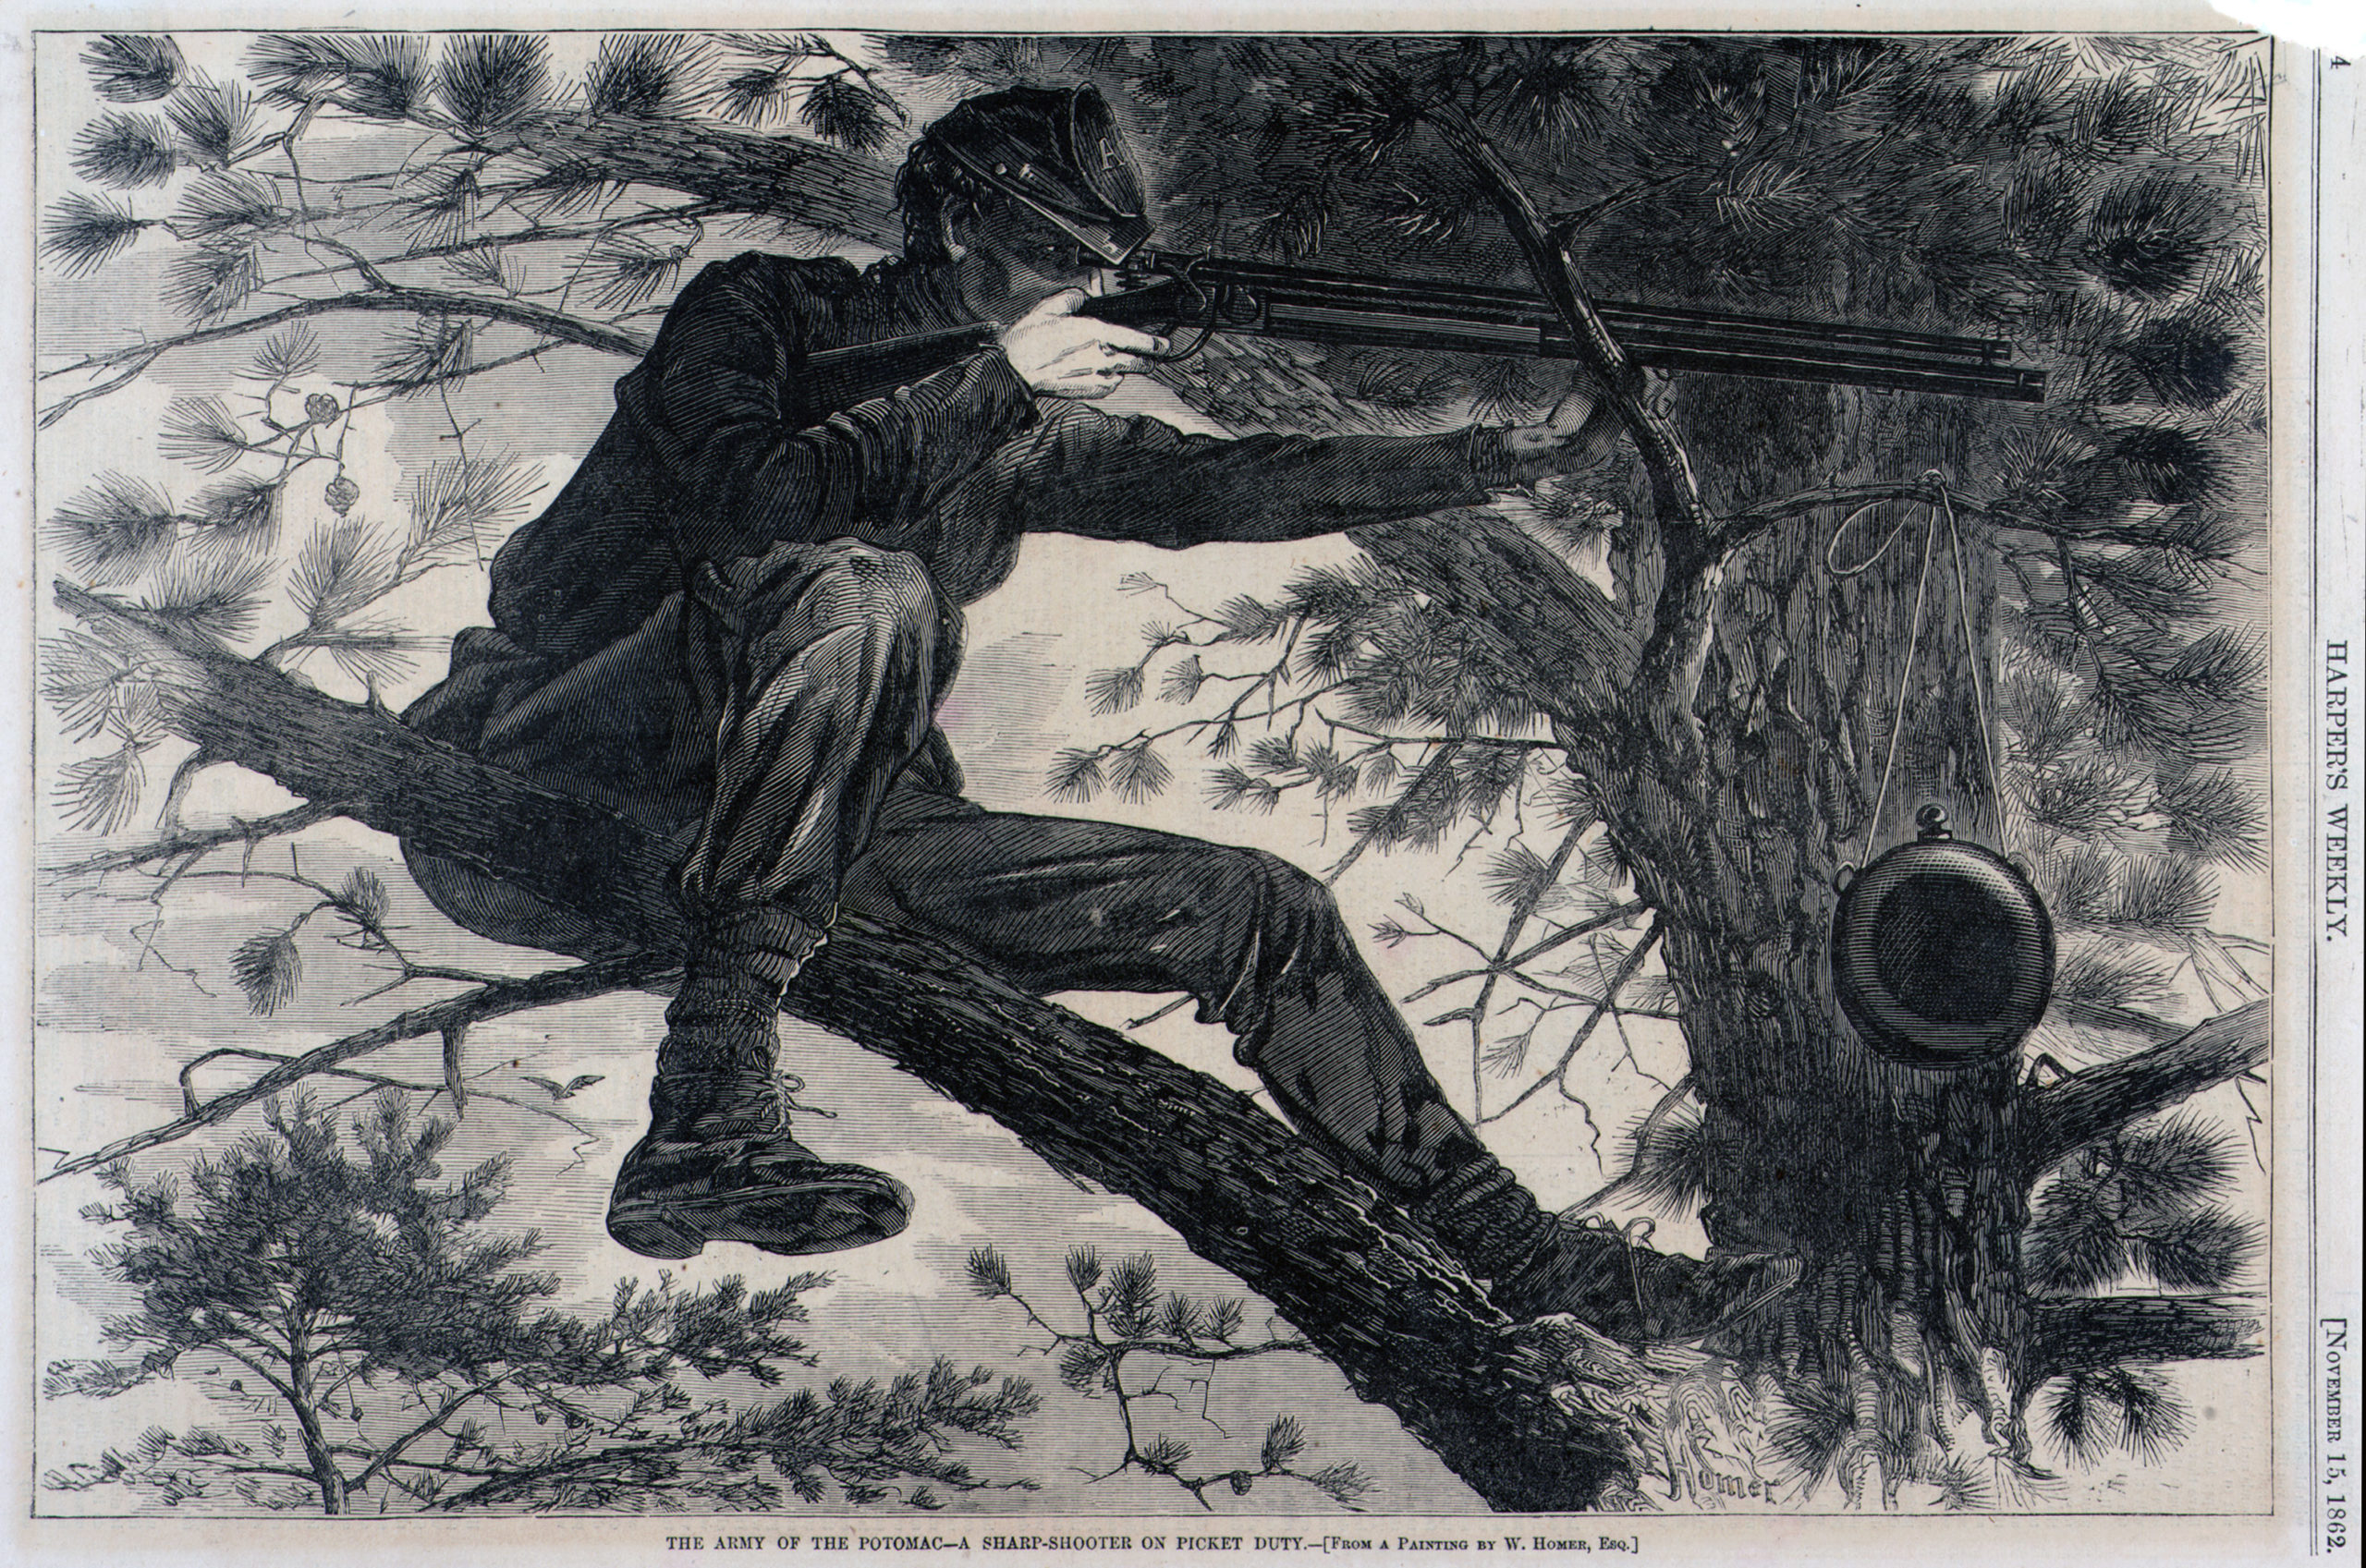 Winslow Homer, “The Army of the Potomac—A Sharpshooter on Picket Duty,” Harper's Weekly, November 15, 1862, wood engraving (Smithsonian American Art Museum)